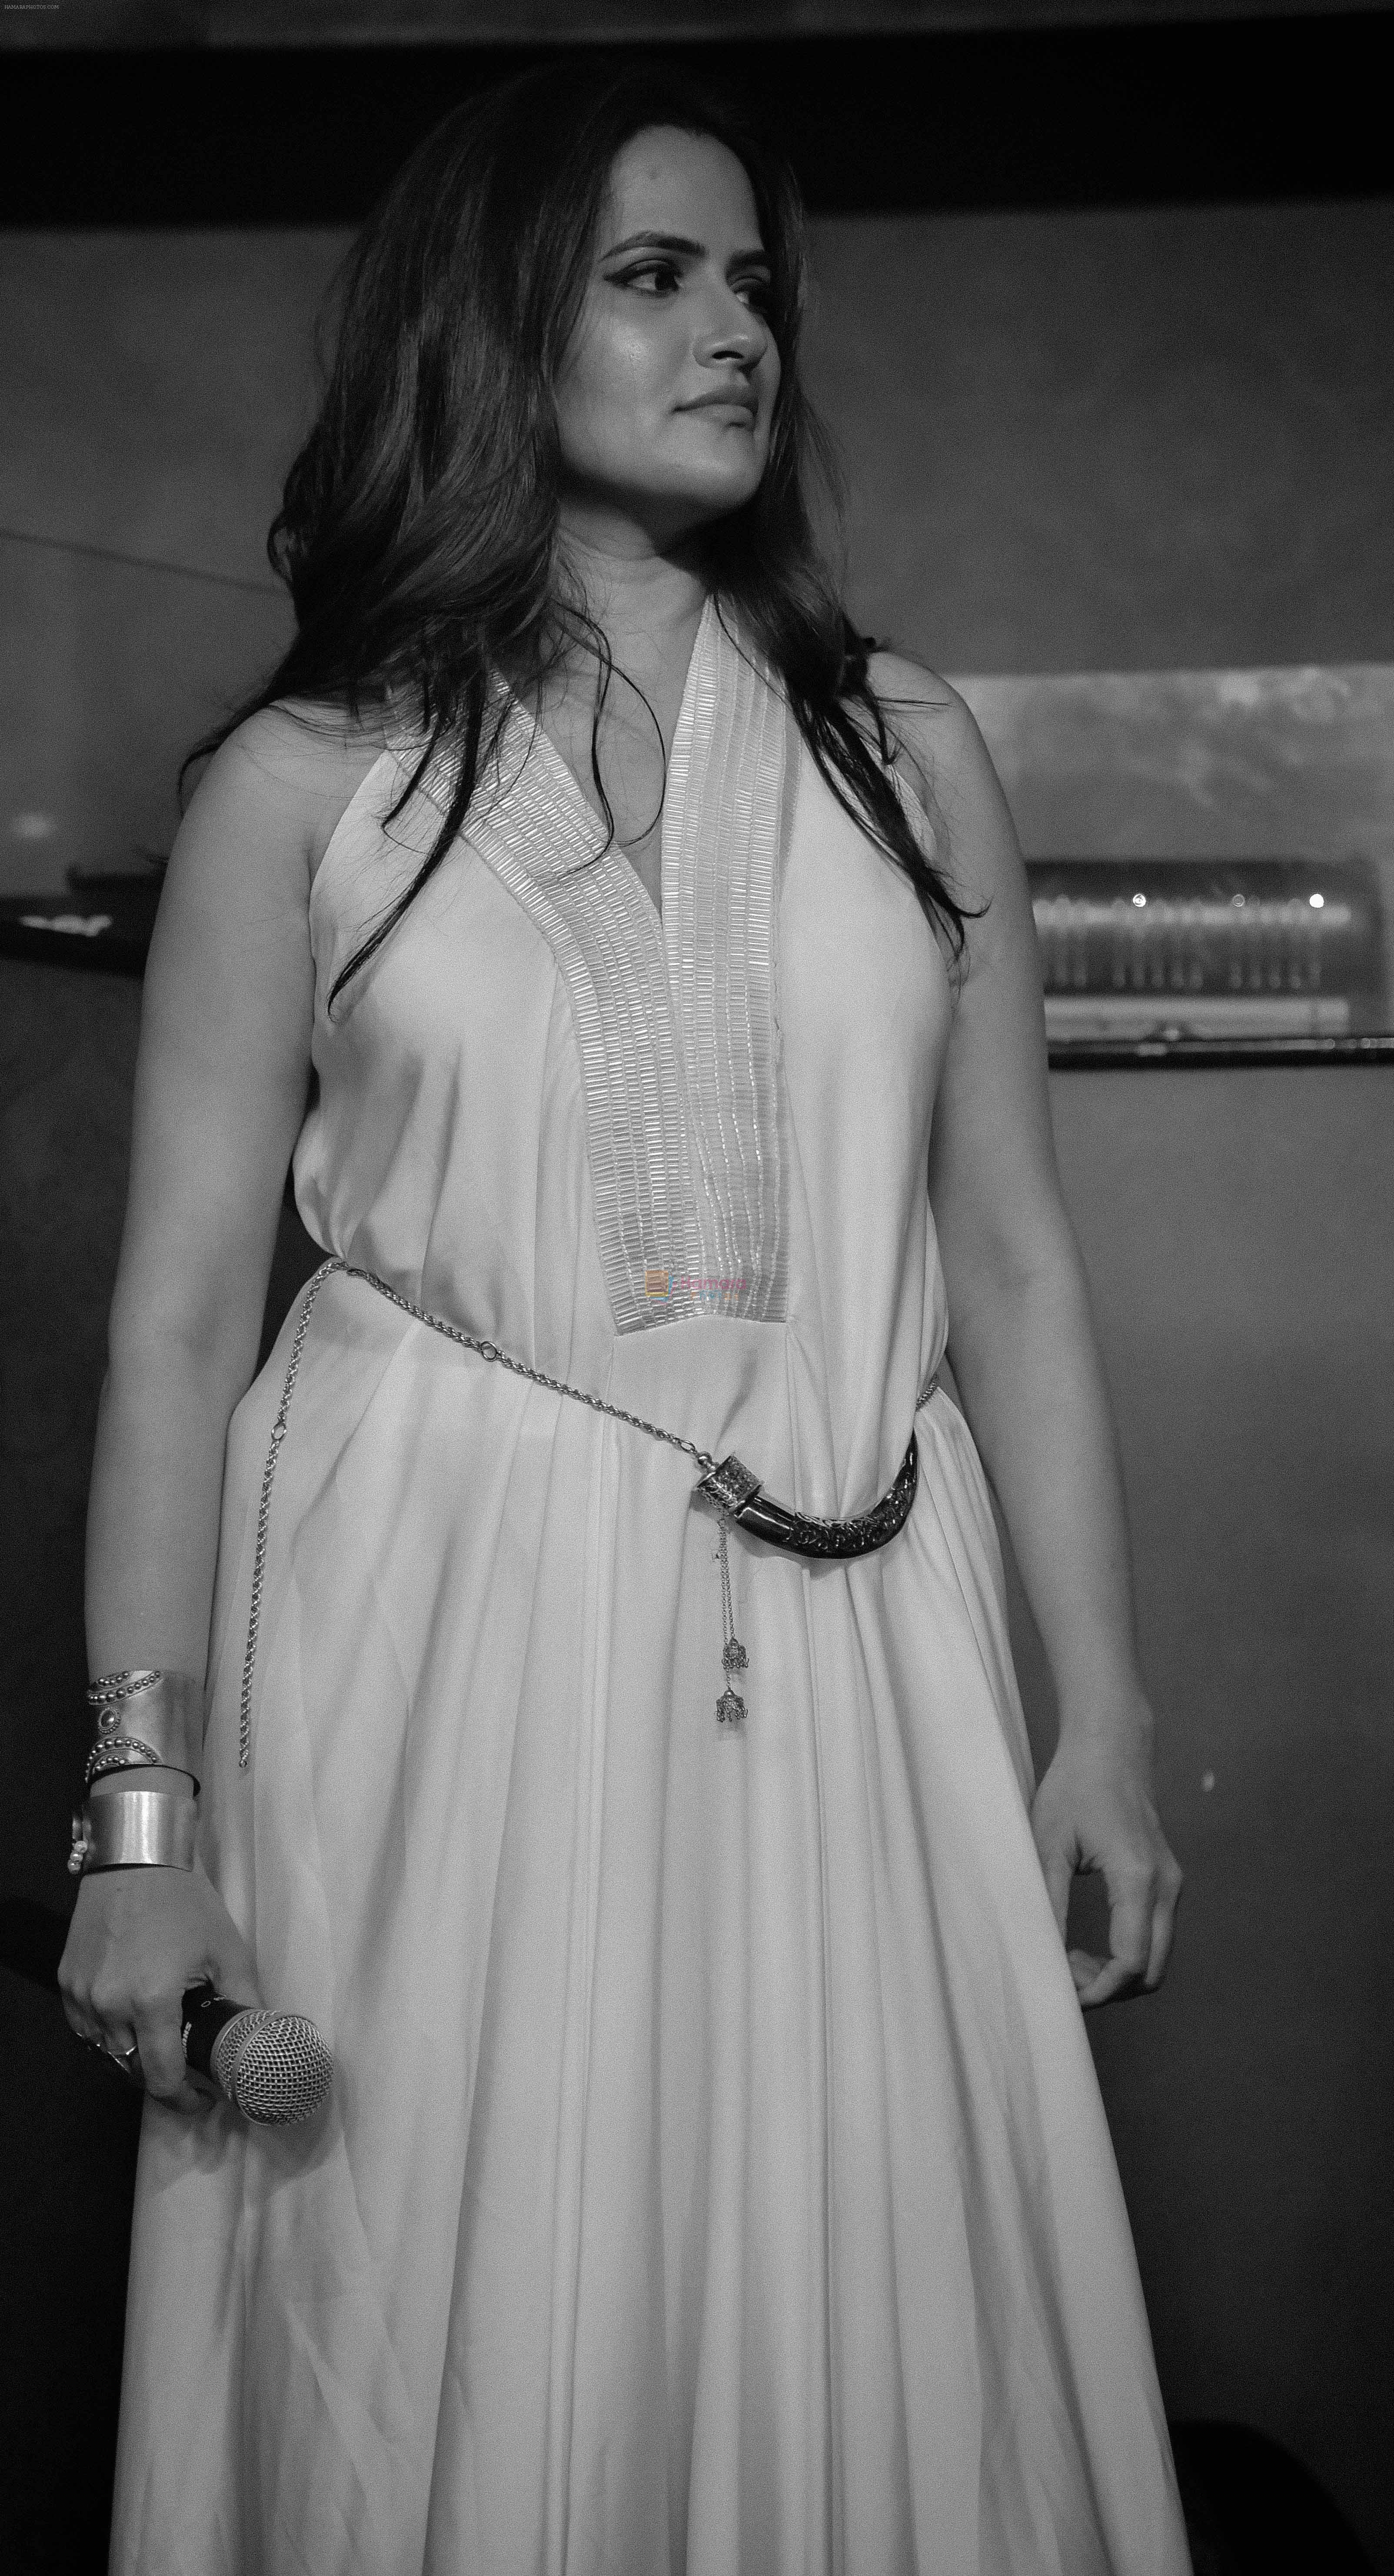 Sona Mohapatra at the launch of the album The Punjab Project on 12th July 2015